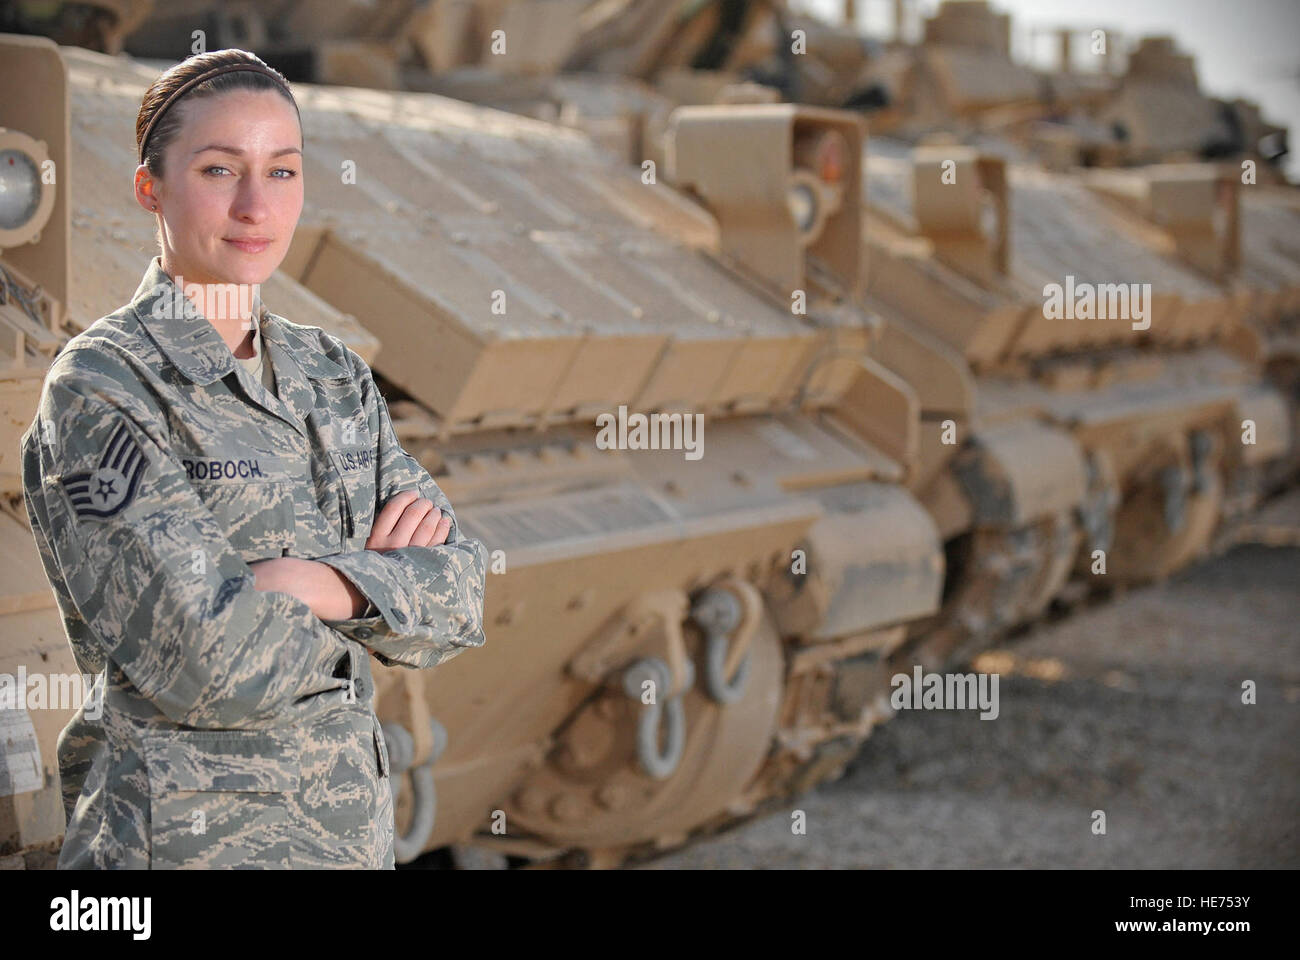 Staff Sgt. Esther Roboch, Tallil redistribution property assistance team's rolling stock NCO in charge, poses for a photo in front of a line of Bradley tanks March 5, 2011, at Ali Air Base, Iraq. Sgt. Roboch is a native of Jacksonville, Fla. Stock Photo